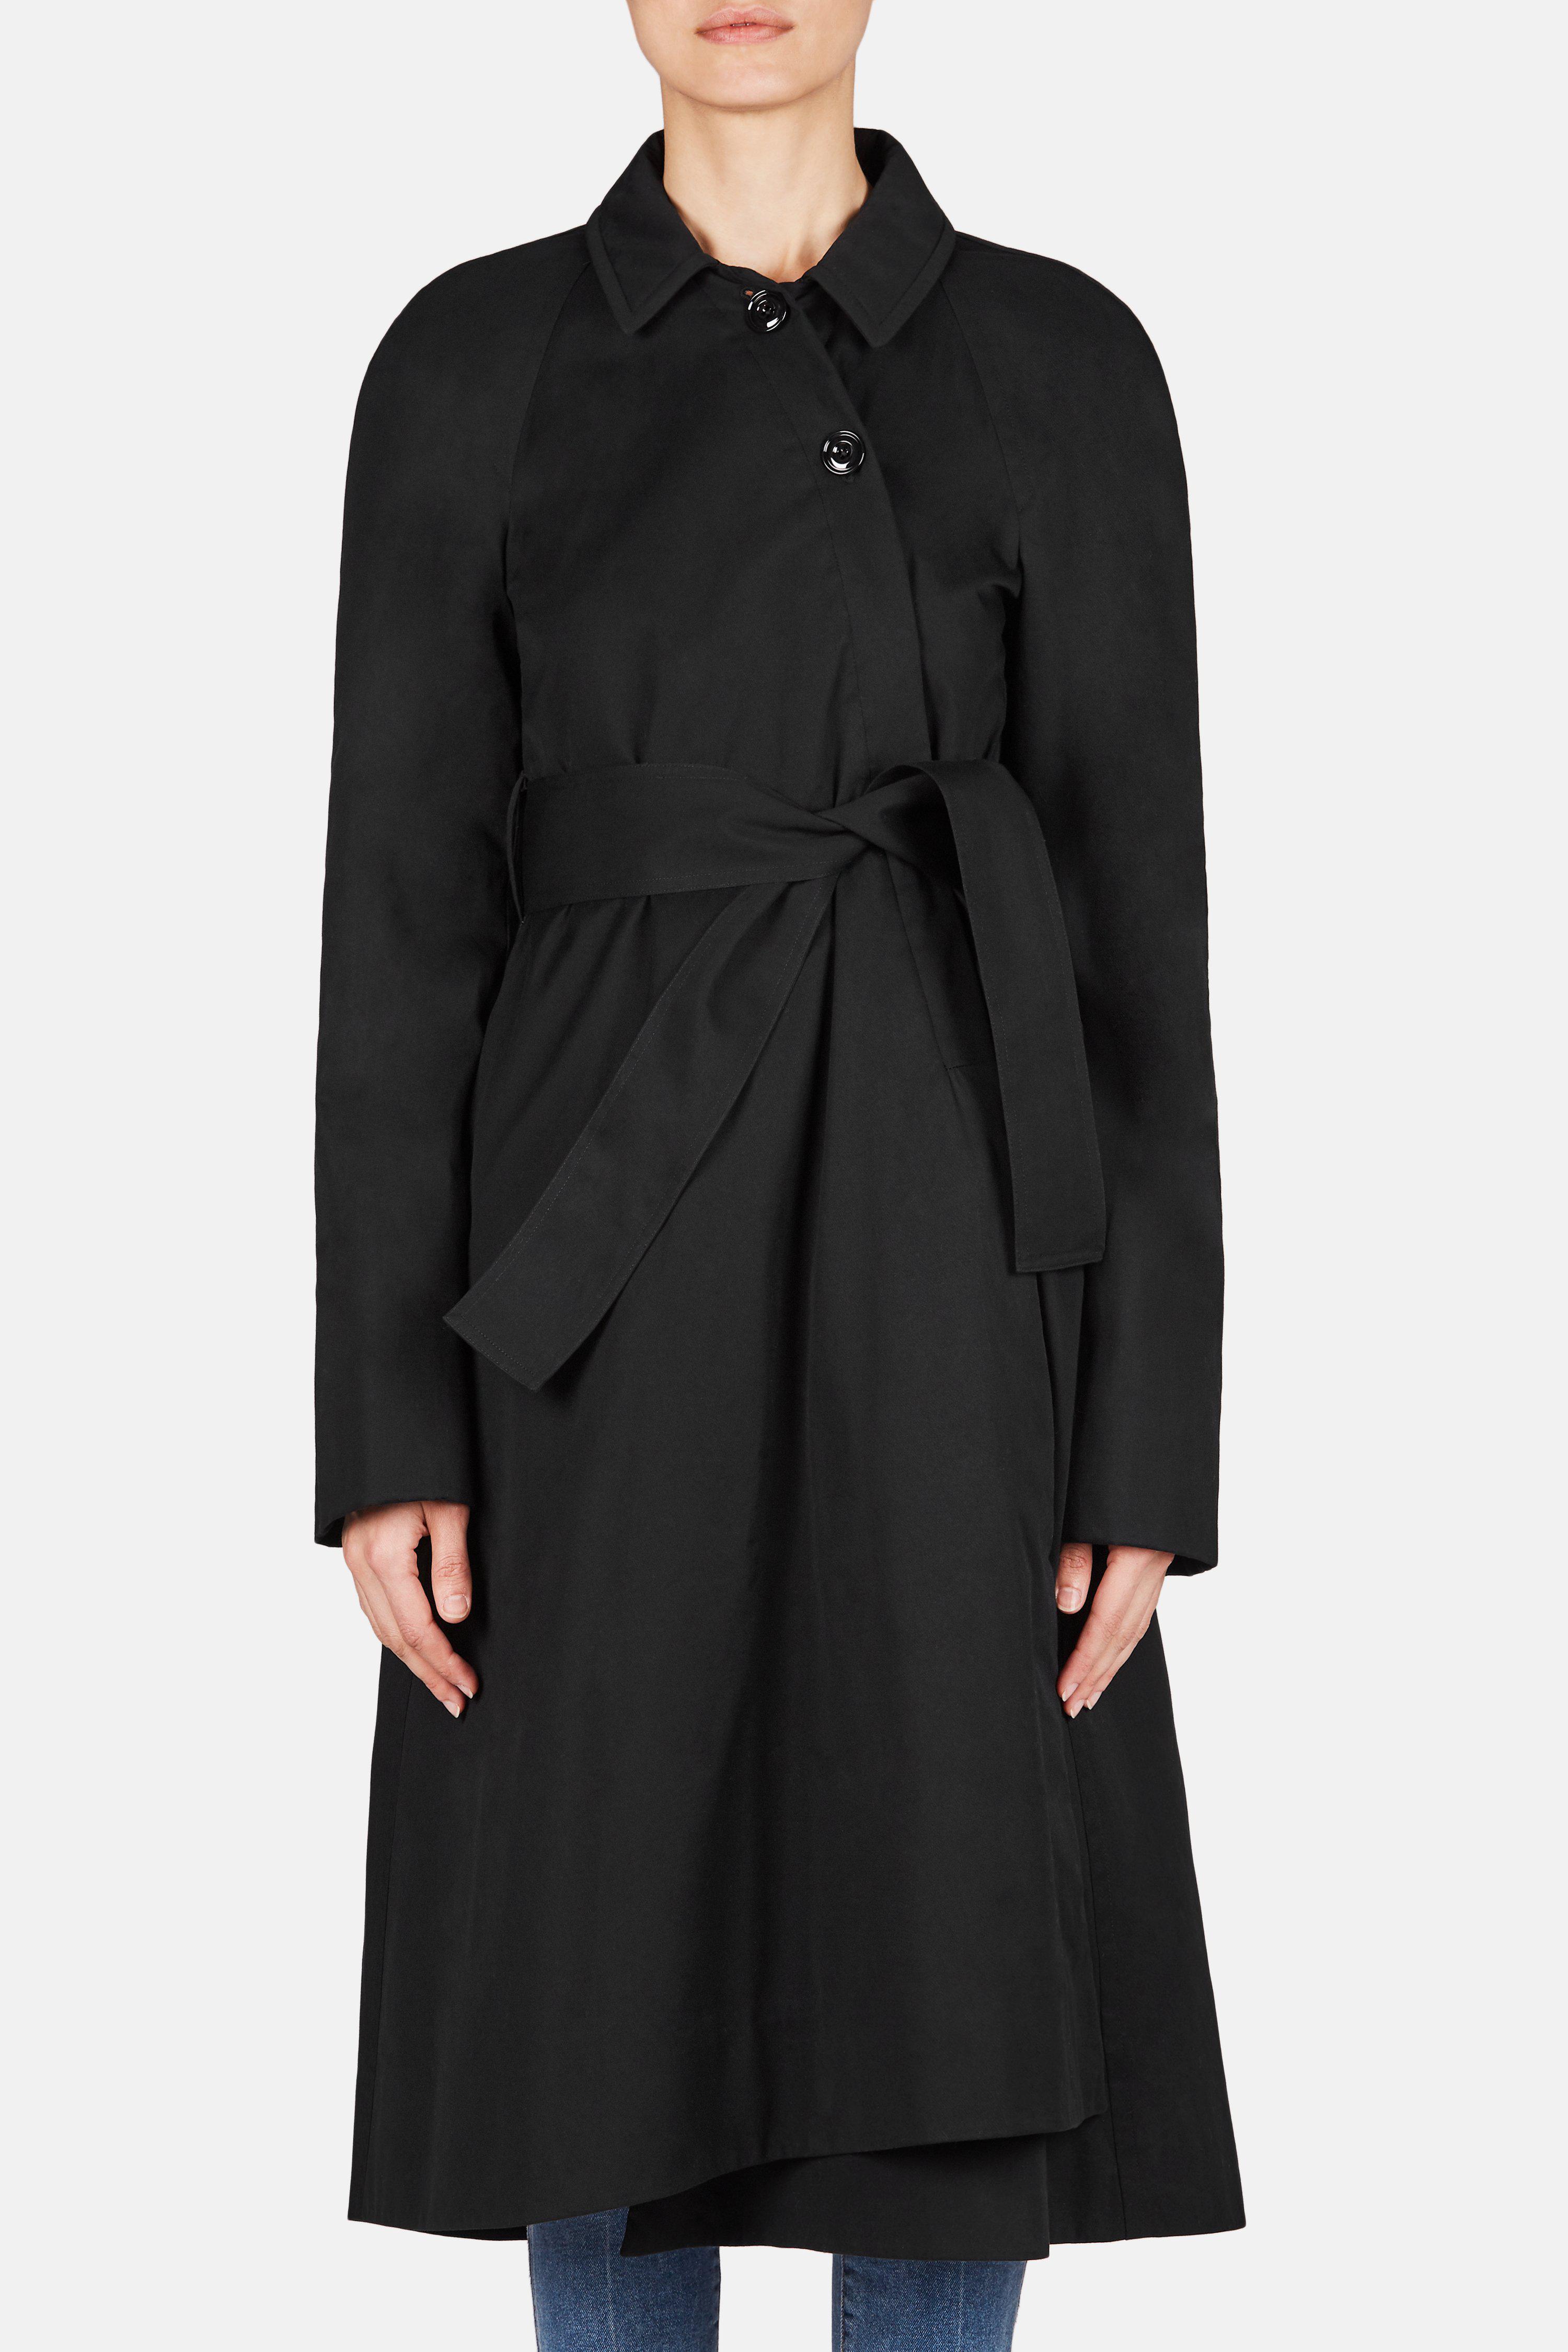 Lyst - Lemaire Wadded Coat in Black